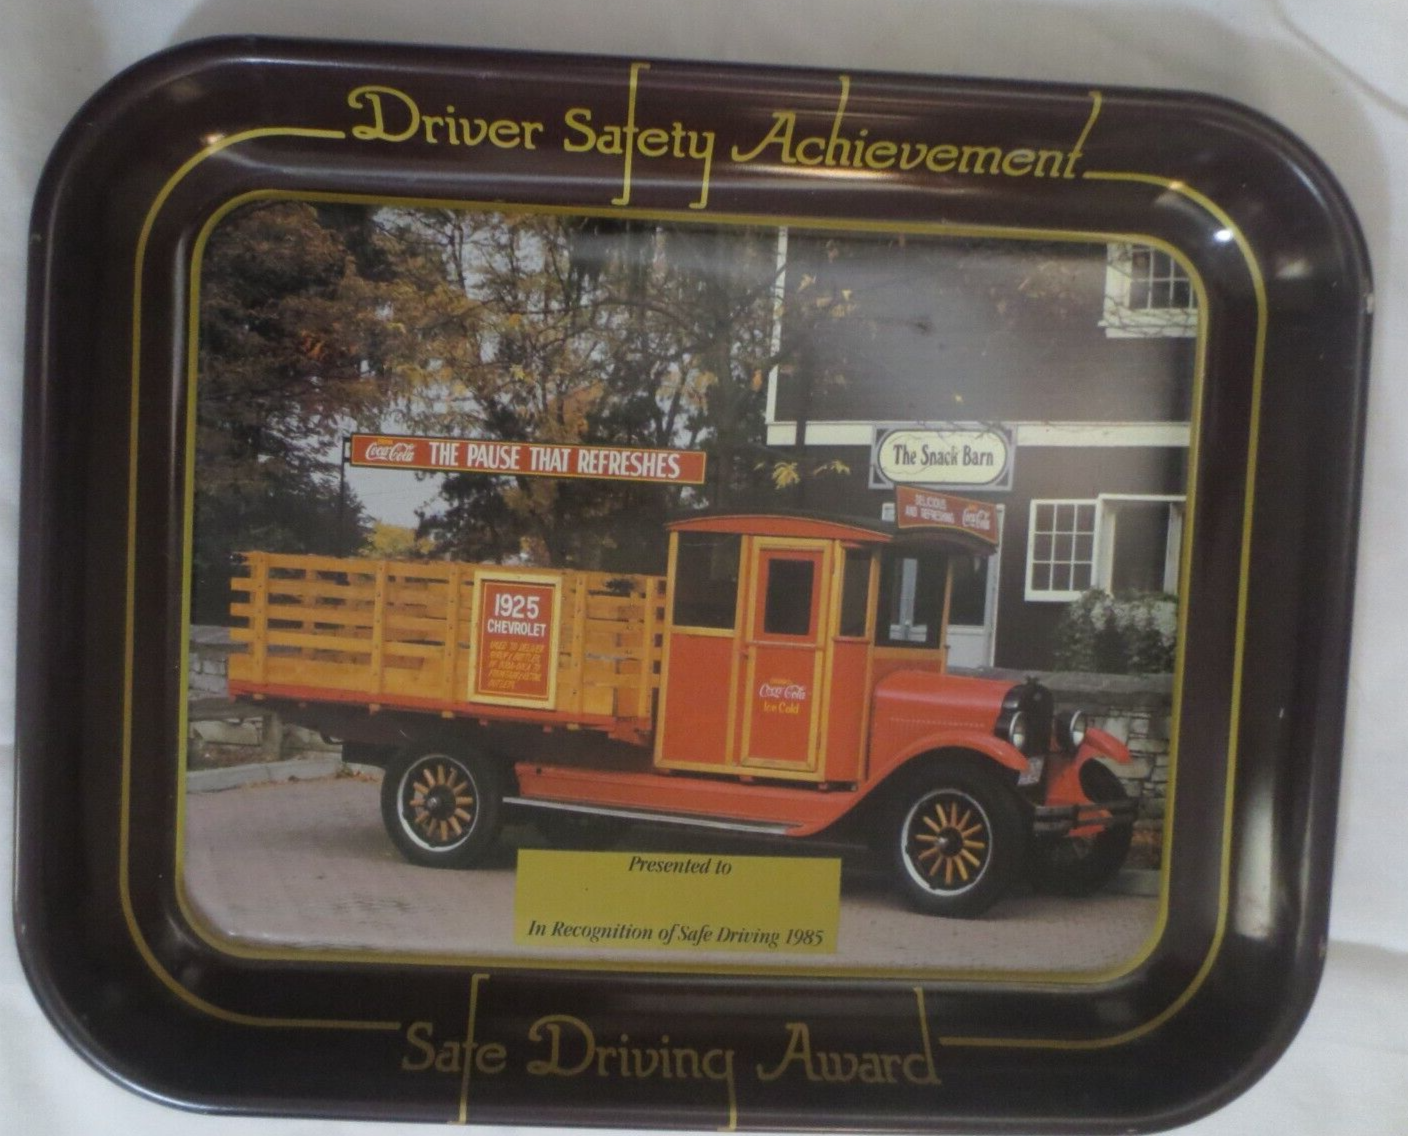 Primary image for Coca-Cola Drive Safety Achievement Award Tray  1985